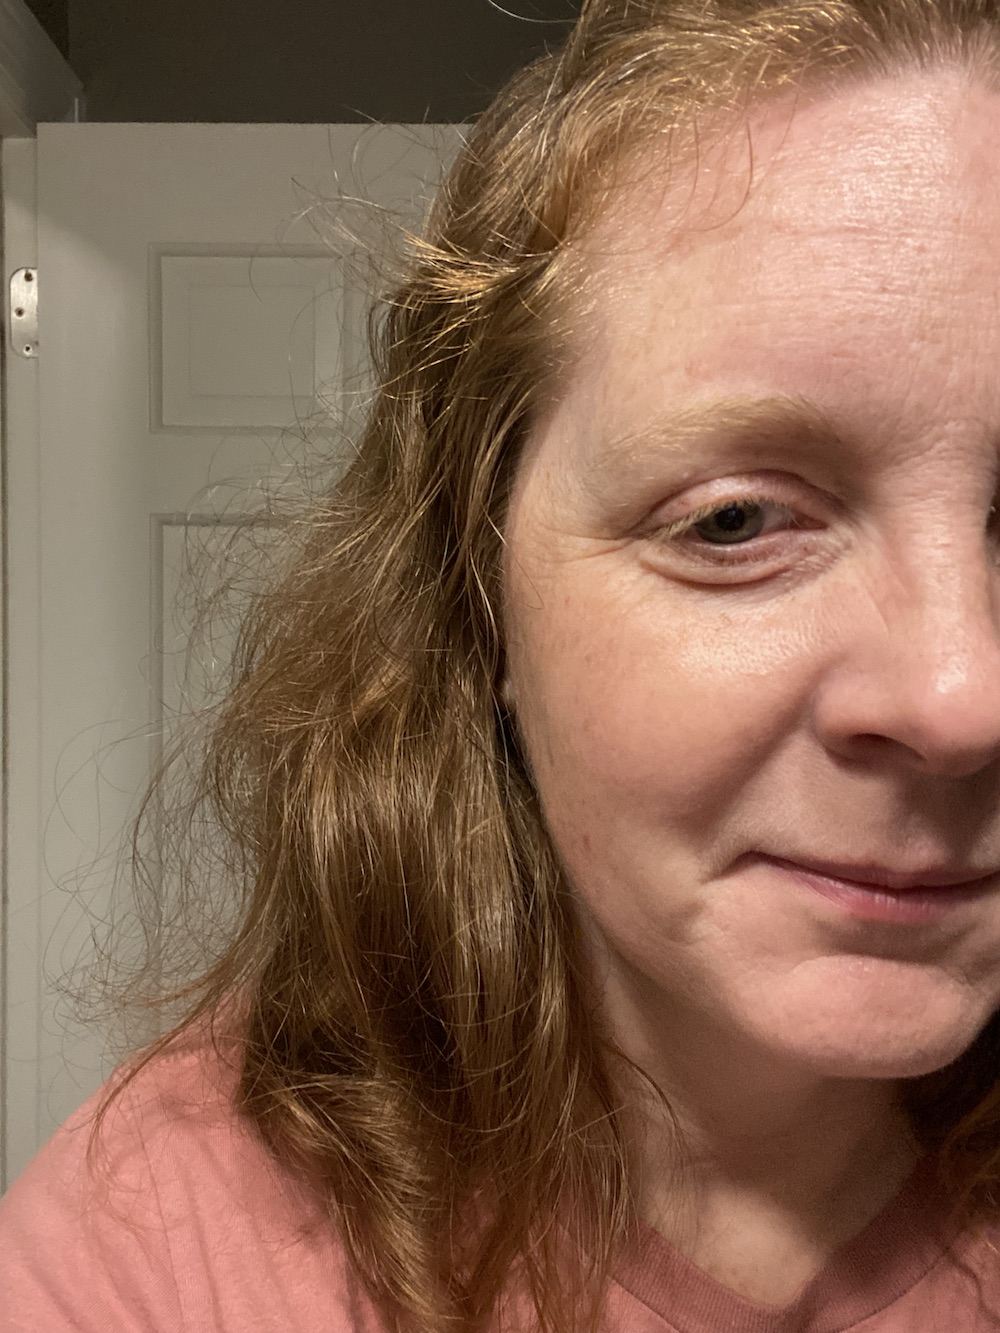 After one wash, the Color WOW Dream Coat anti-frizz treatment left something to be desired.